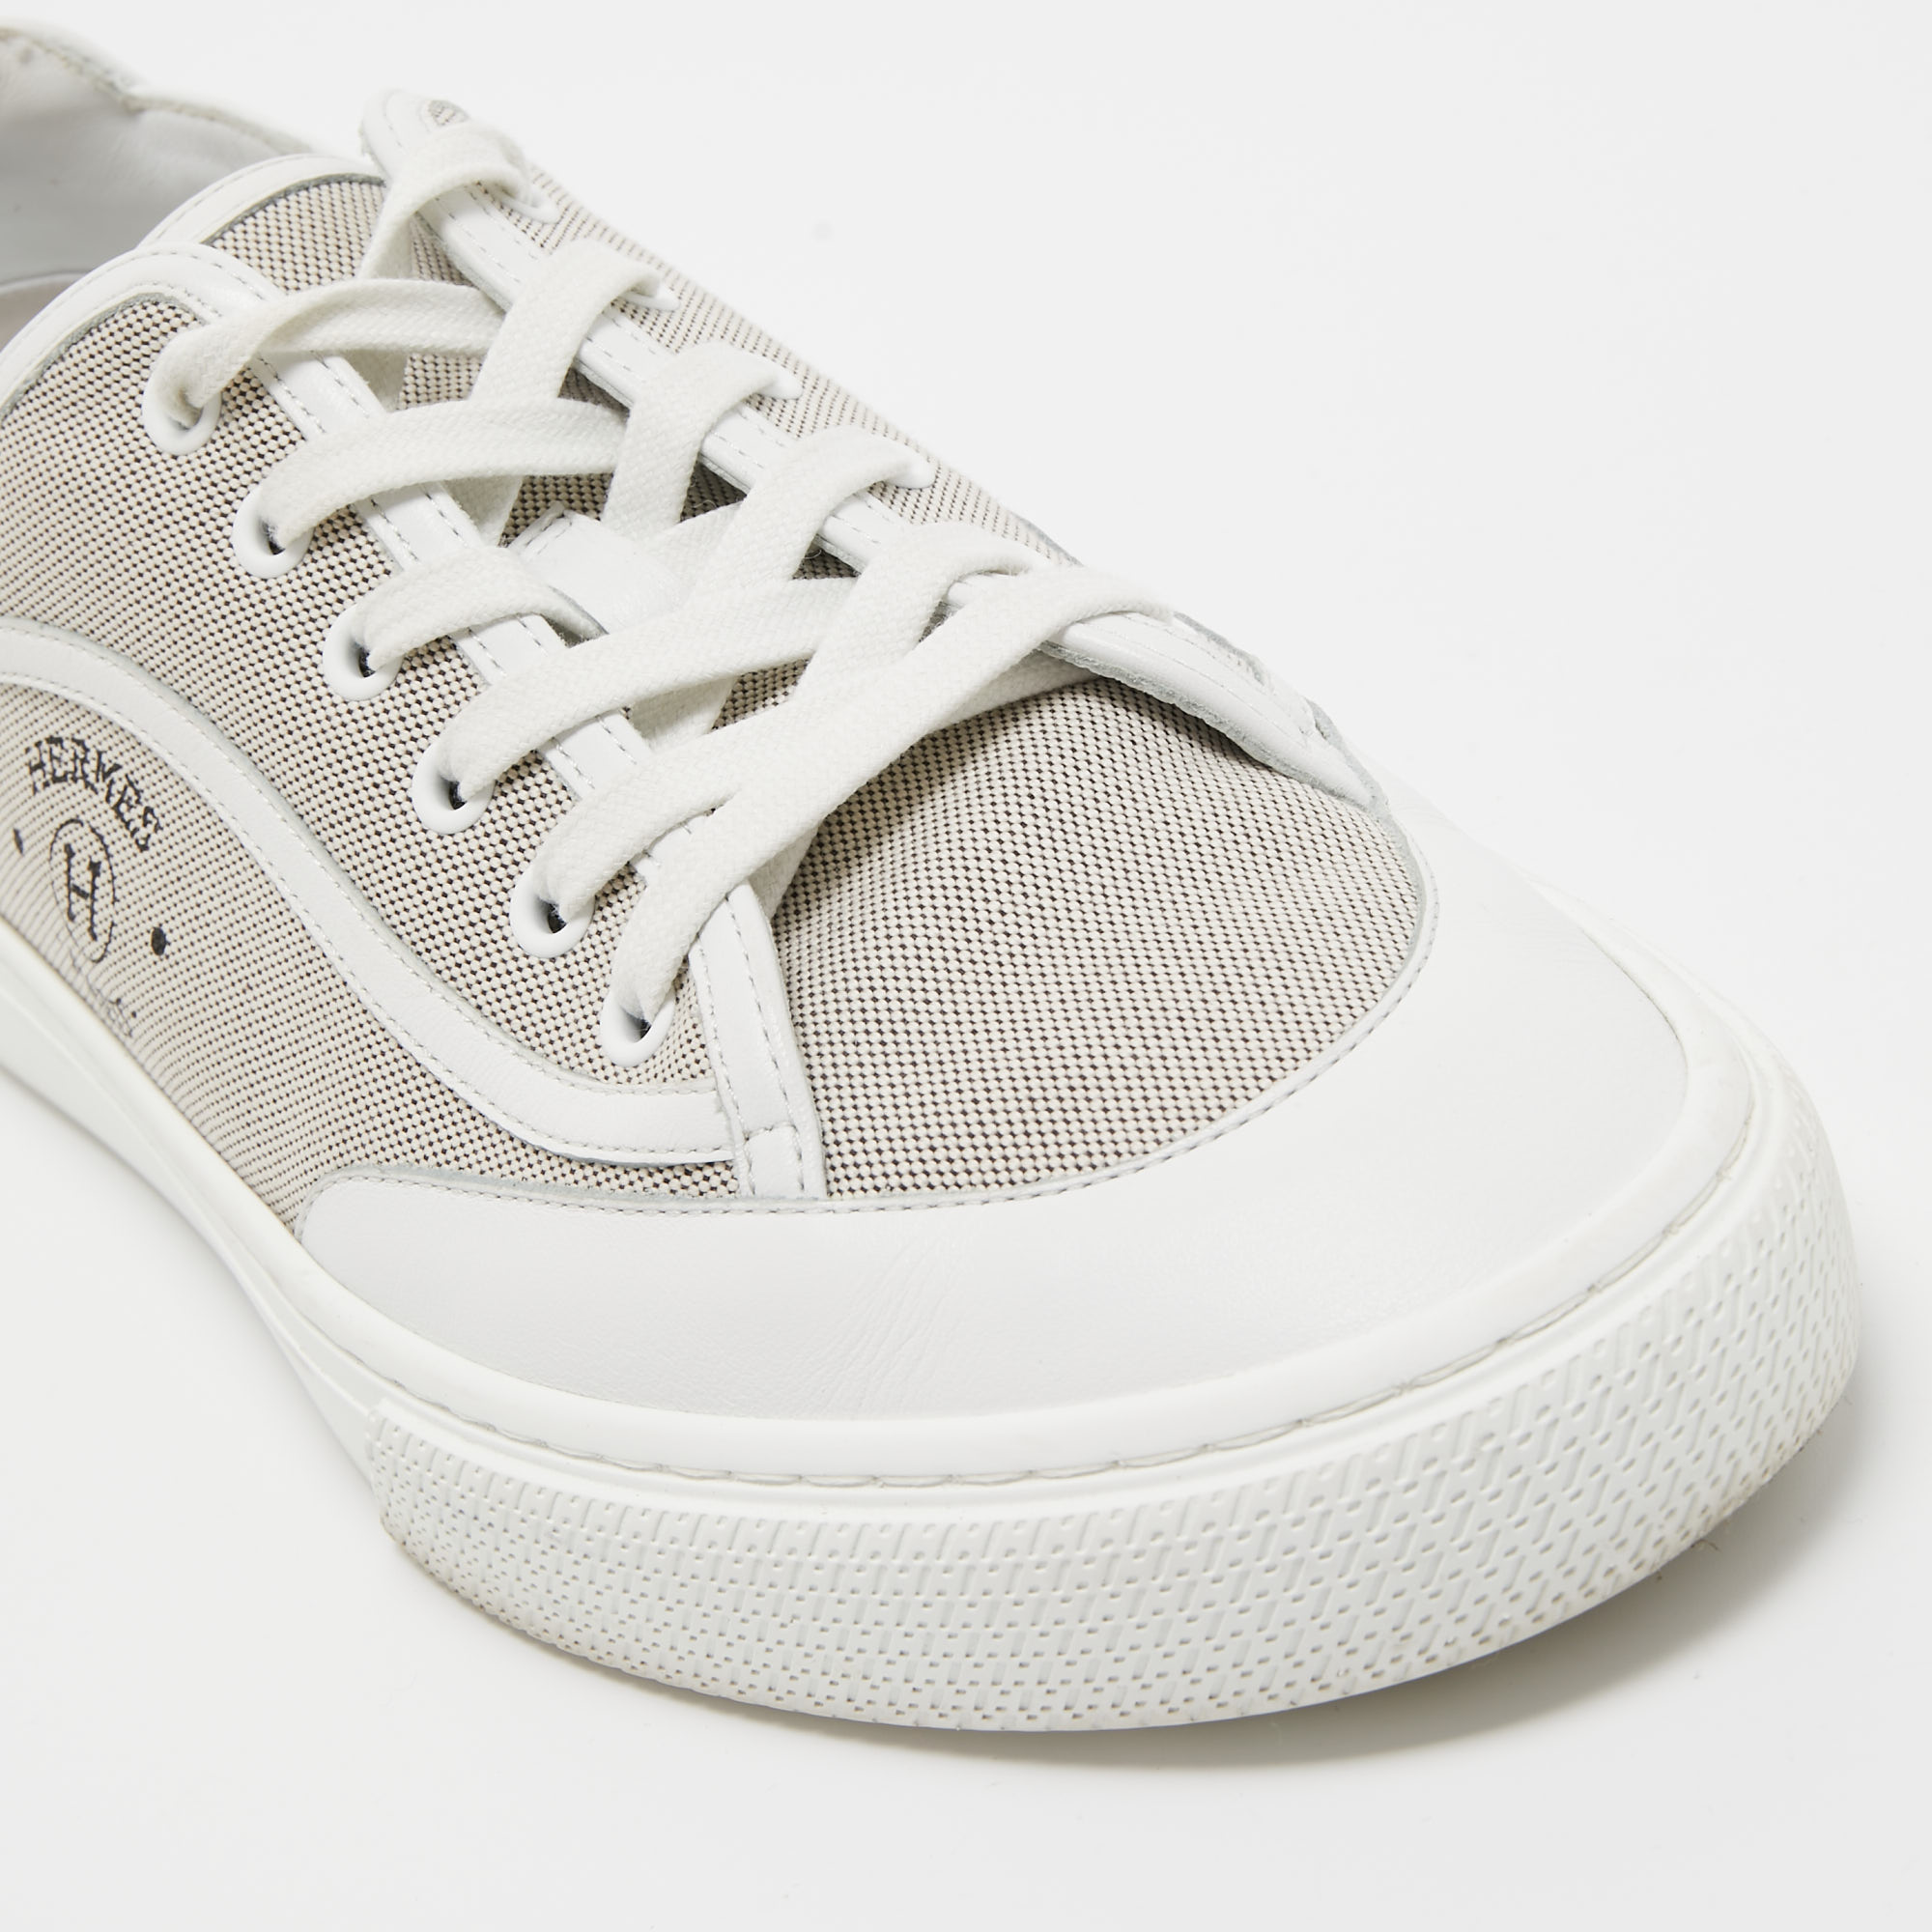 Hermes Grey/White Leather And Canvas Get Low Top Sneakers Size 42